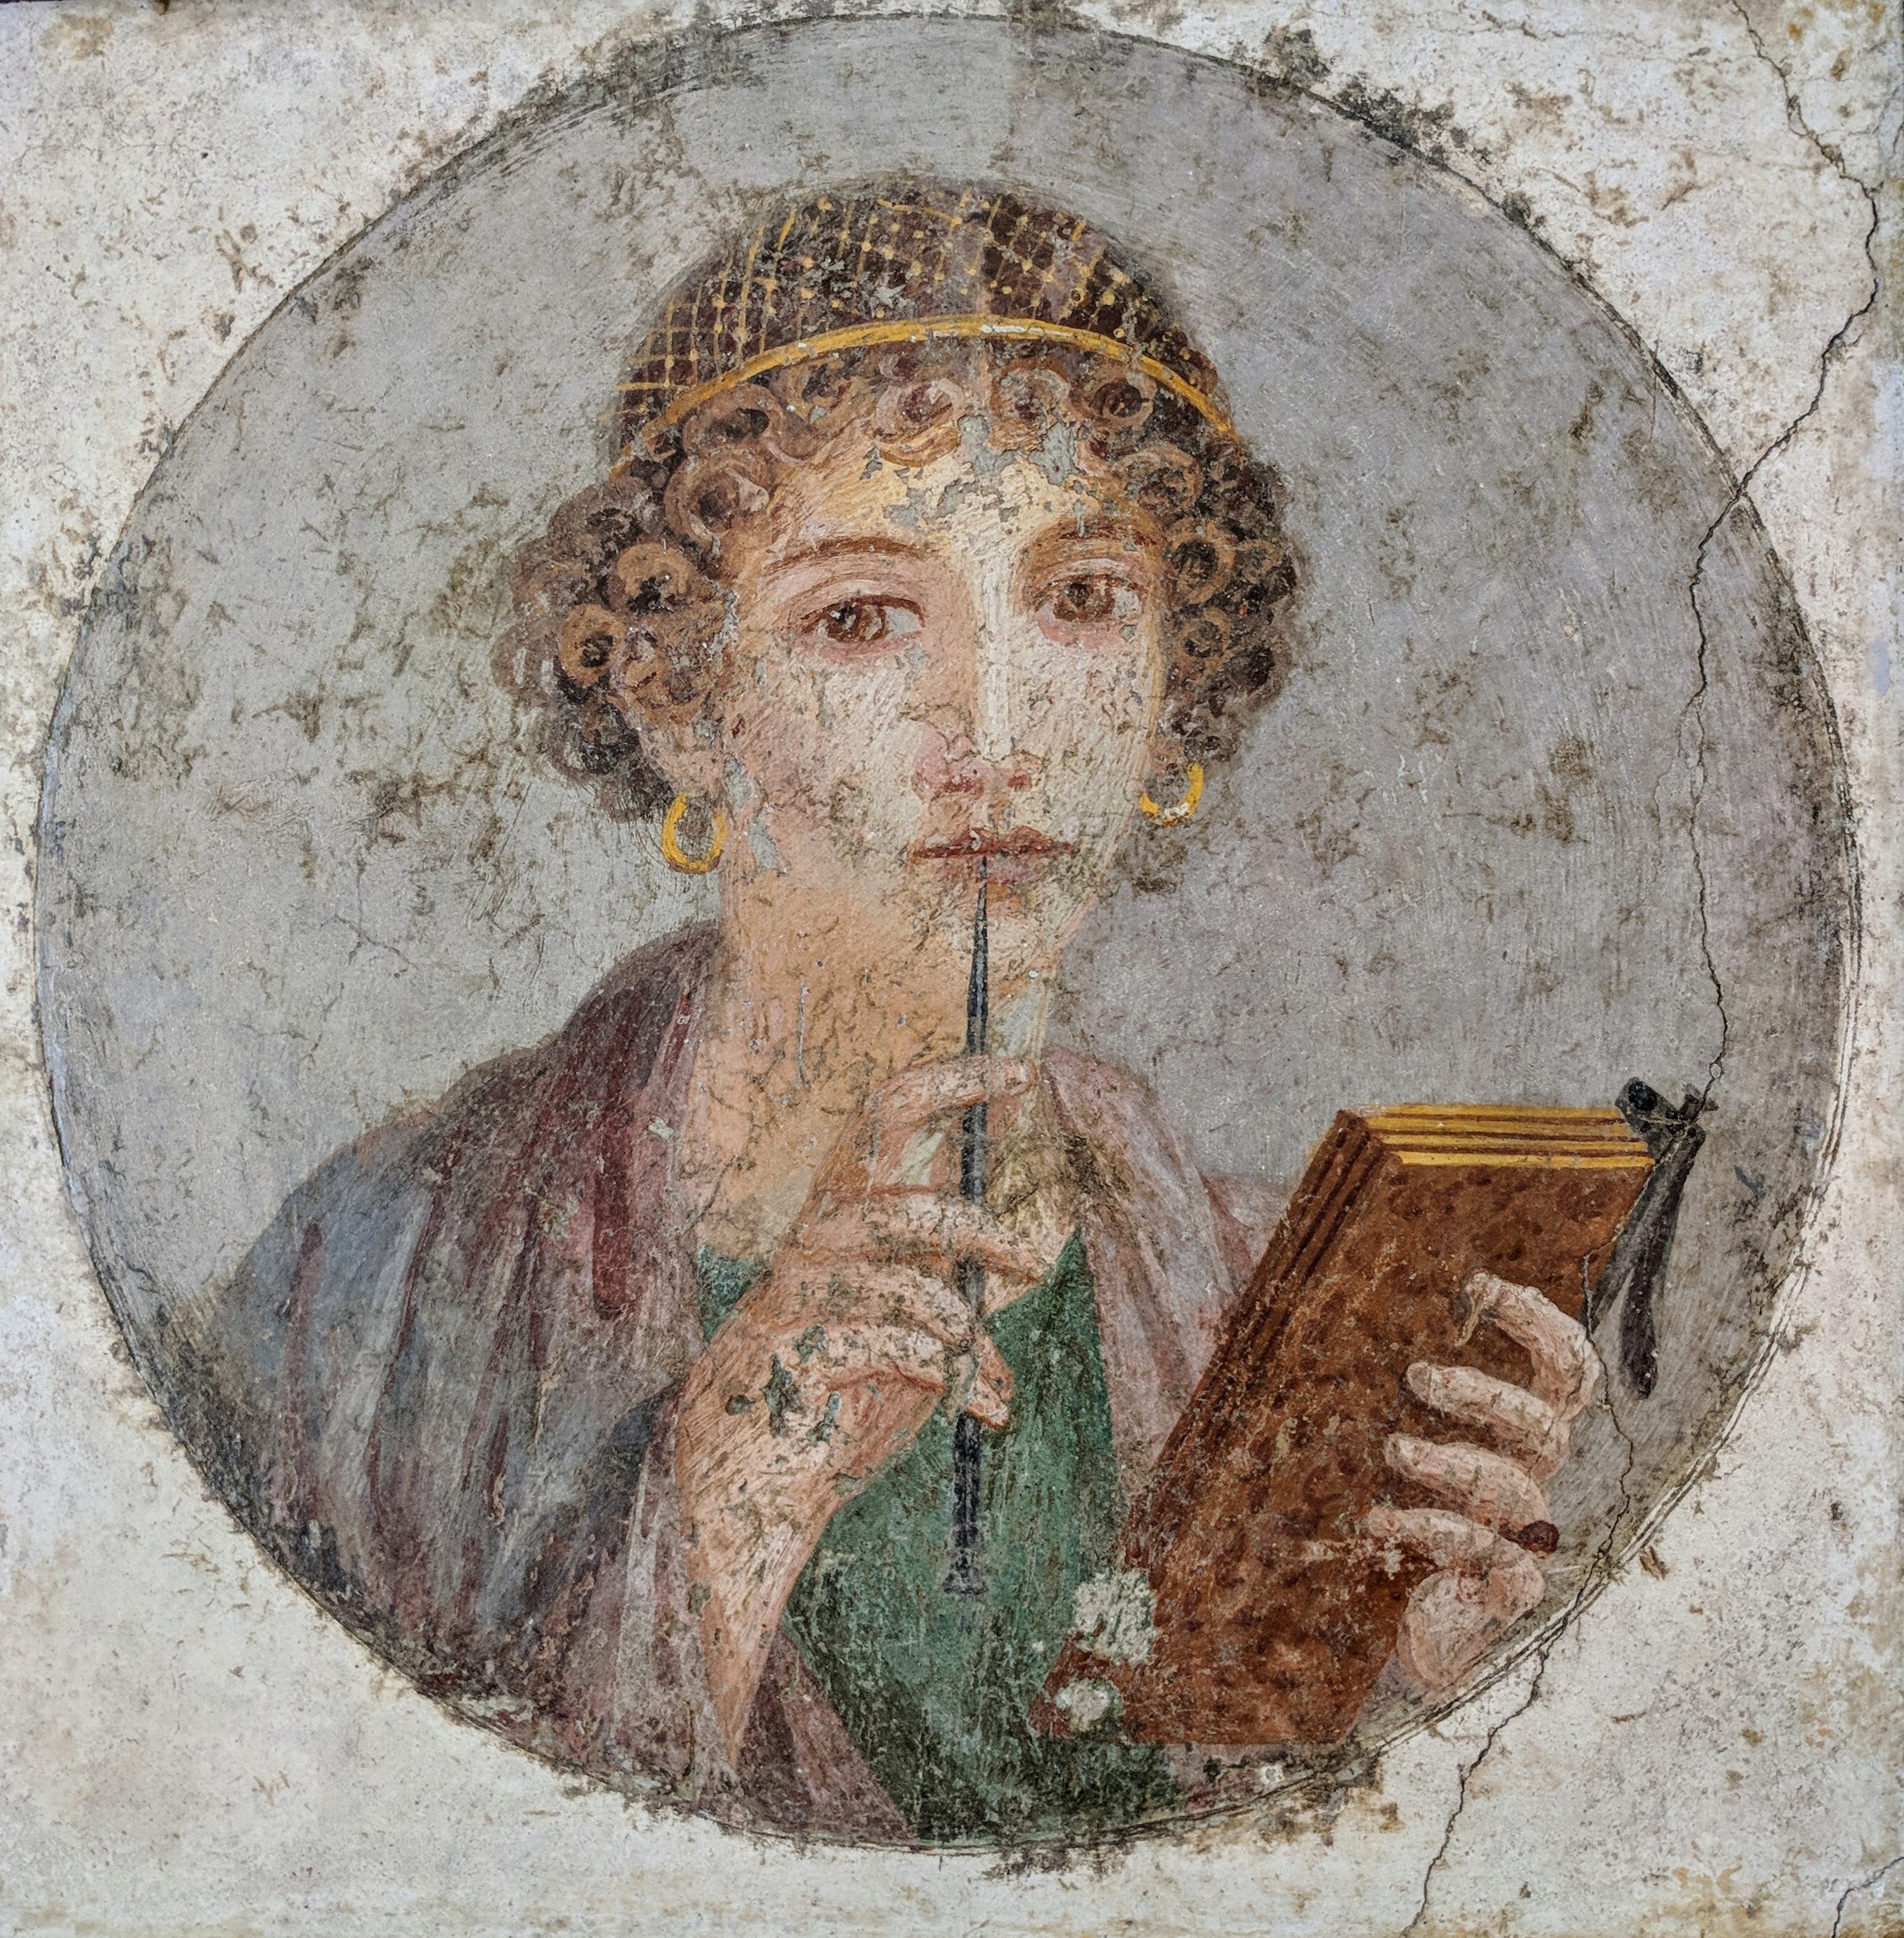 Fresco_of_a_Woman_(Sappho_)_Holding_Stylus_and_Tablet.jpg